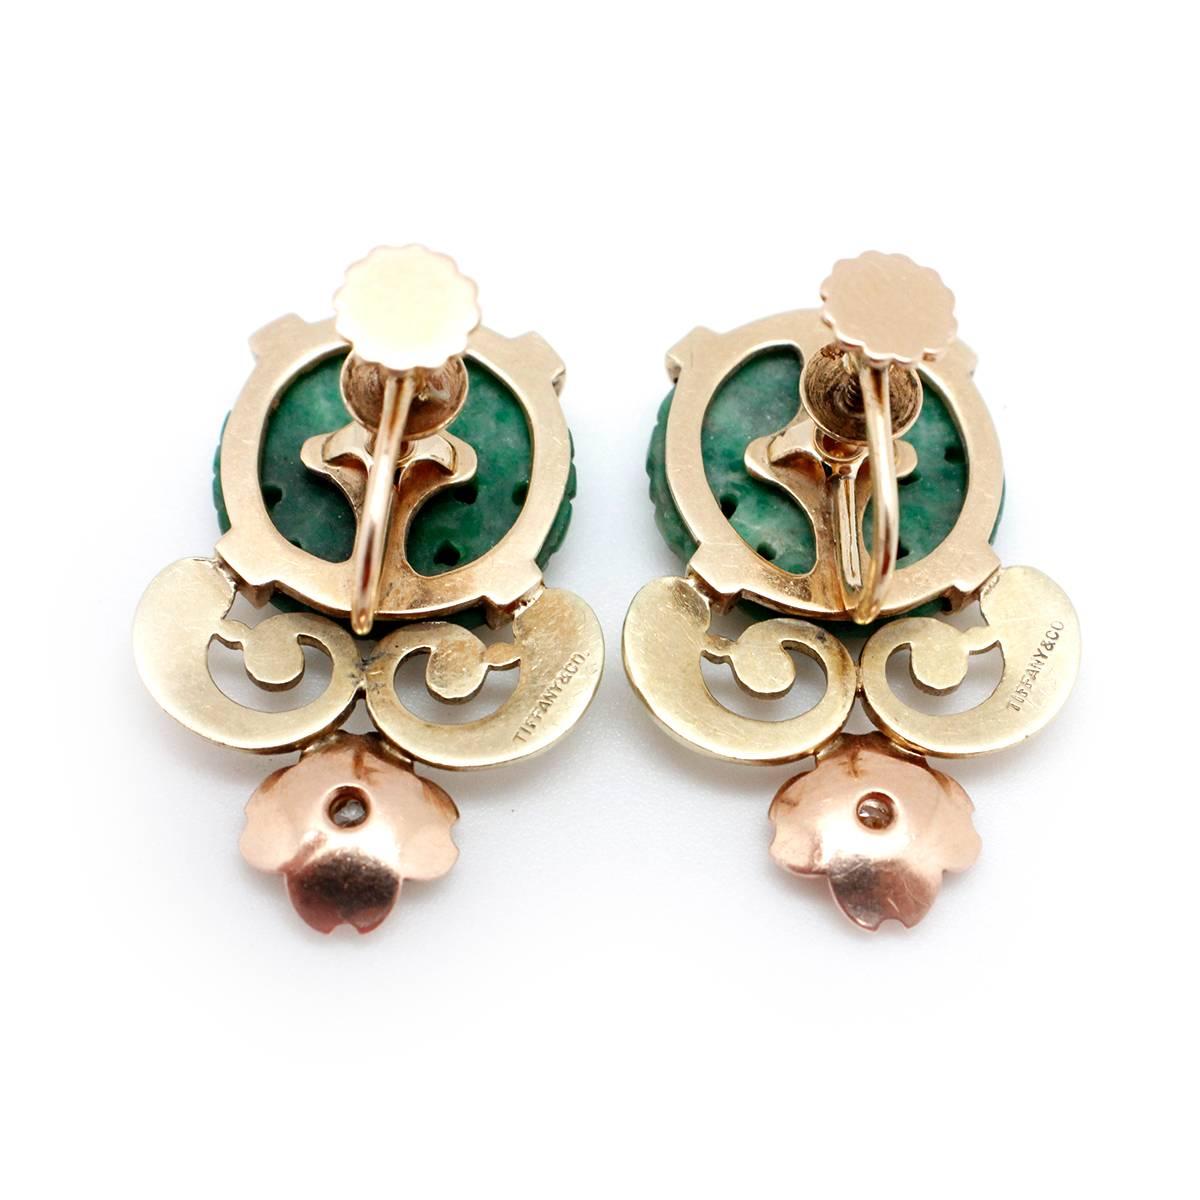 These Extremely Rare Vintage Signed Tiffany & Co. Retro 1935-1950's Hand Carved Natural Jade and Diamond Earrings have approximately .12 carats of VS clarity F color Diamonds and weigh approximately 13 grams. Are approximately 1.5 inches in height